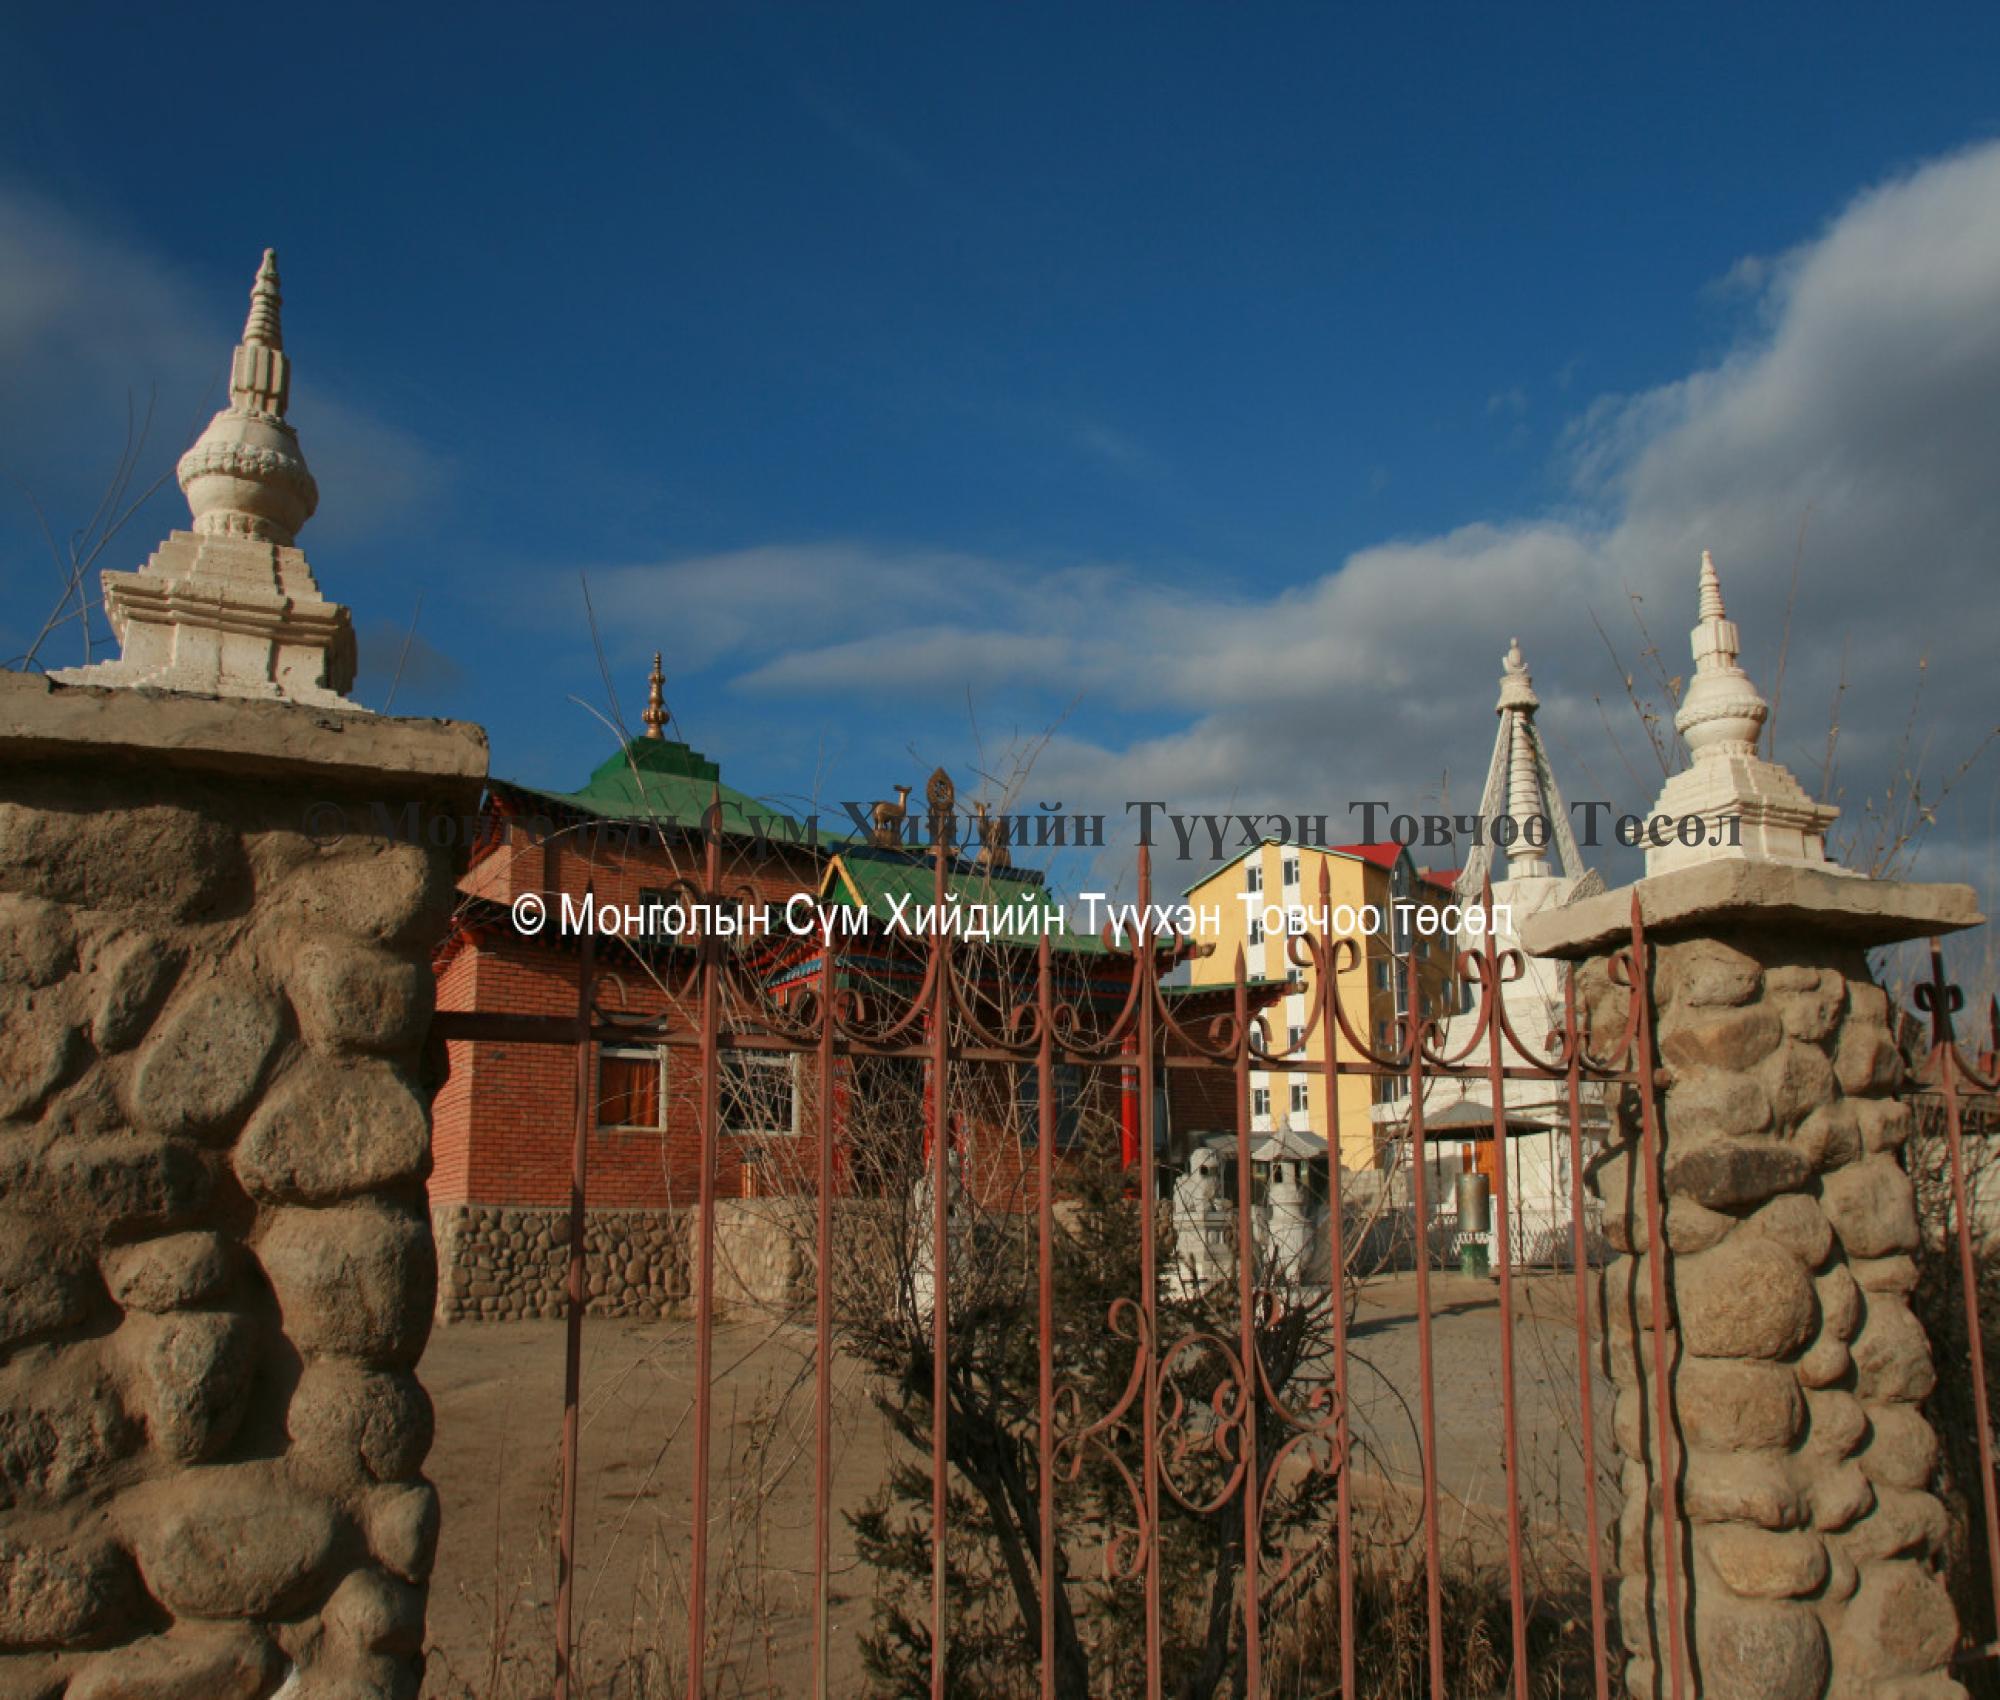 Fence of the monastery